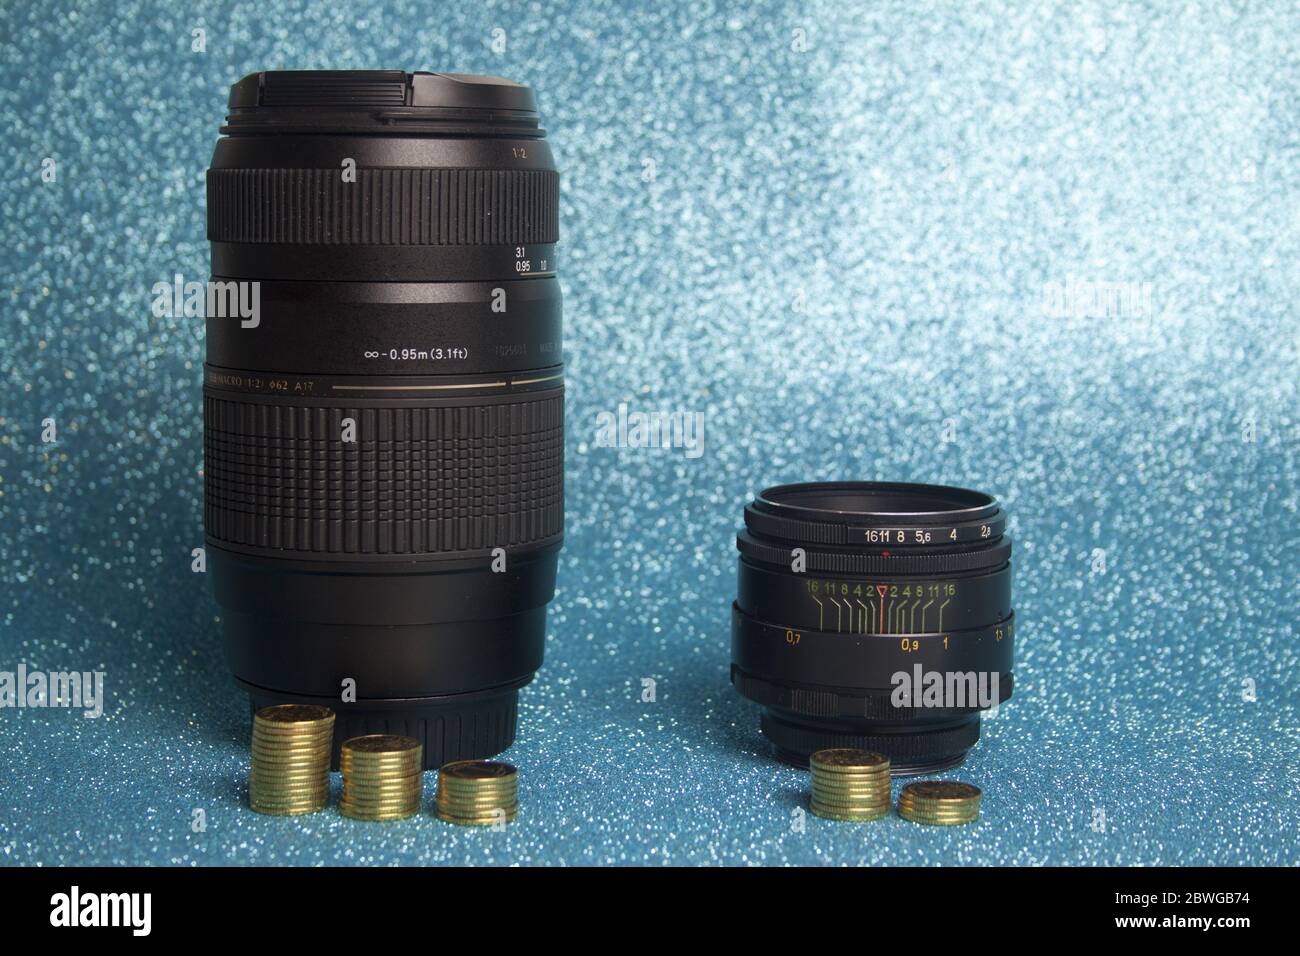 Cheap and old manual lens versus expensive lens with autofocus on a blue background with coins denoting the value of the lenses. Stock Photo